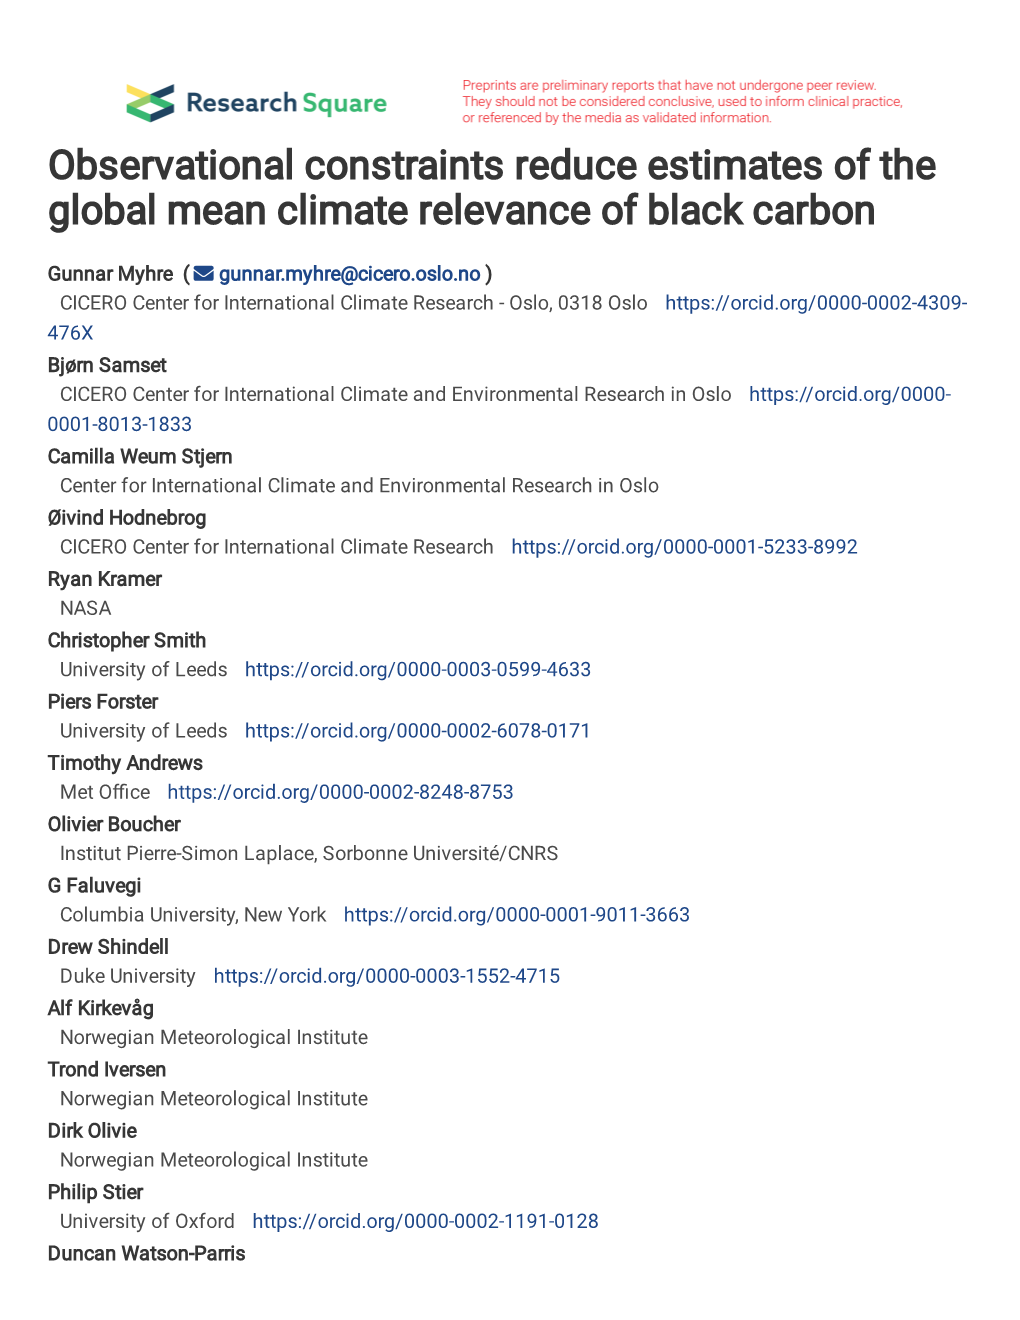 Observational Constraints Reduce Estimates of the Global Mean Climate Relevance of Black Carbon